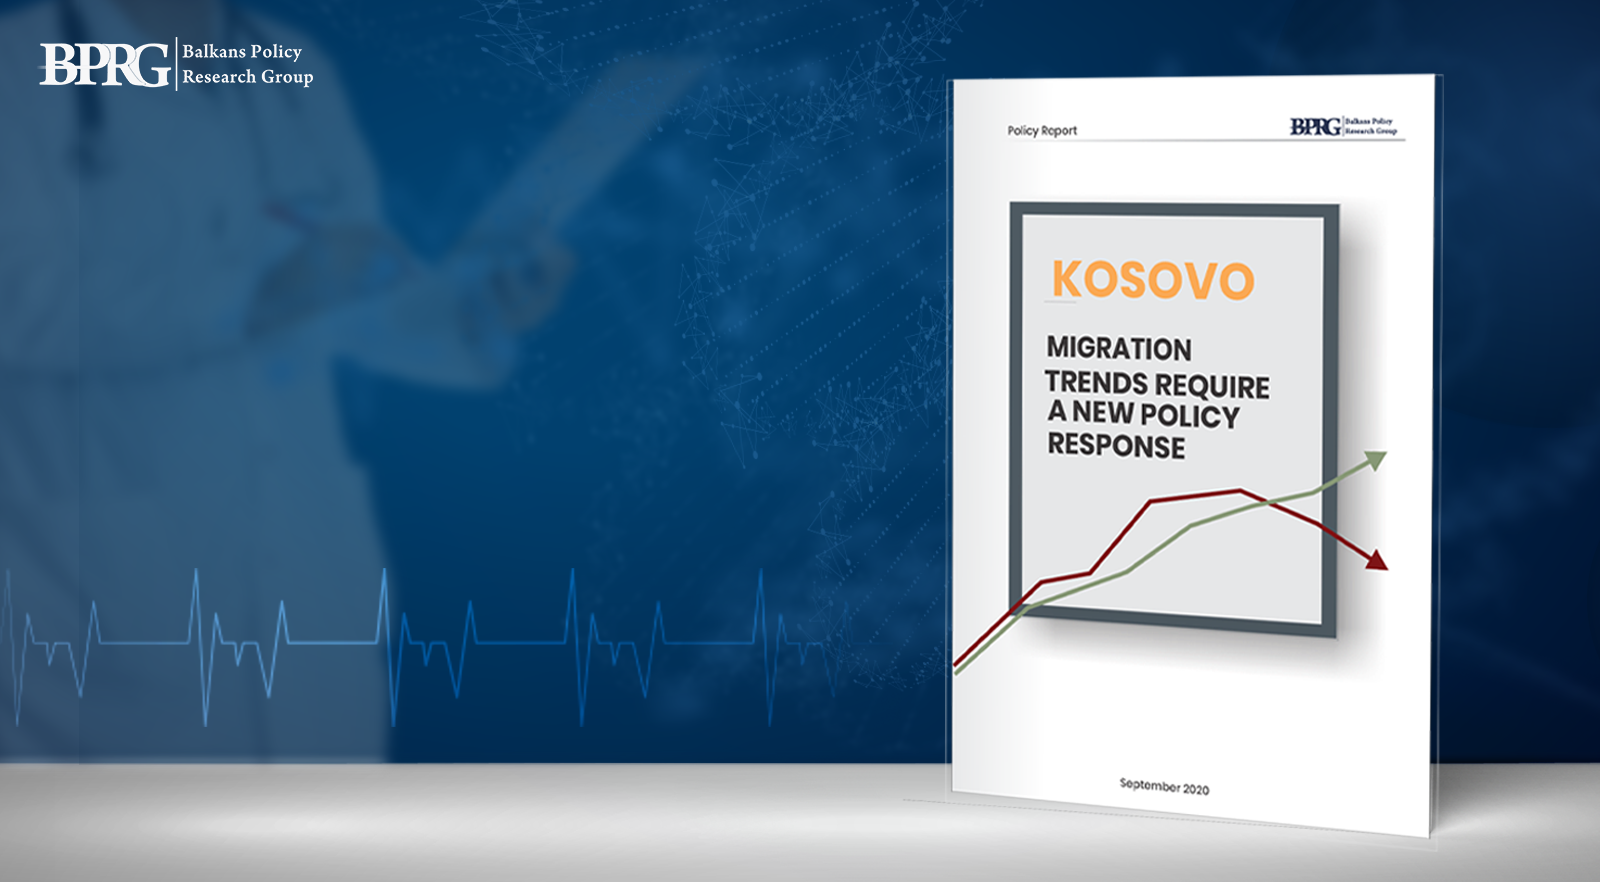 “Kosovo: Migration Trends Require A New Policy Response”